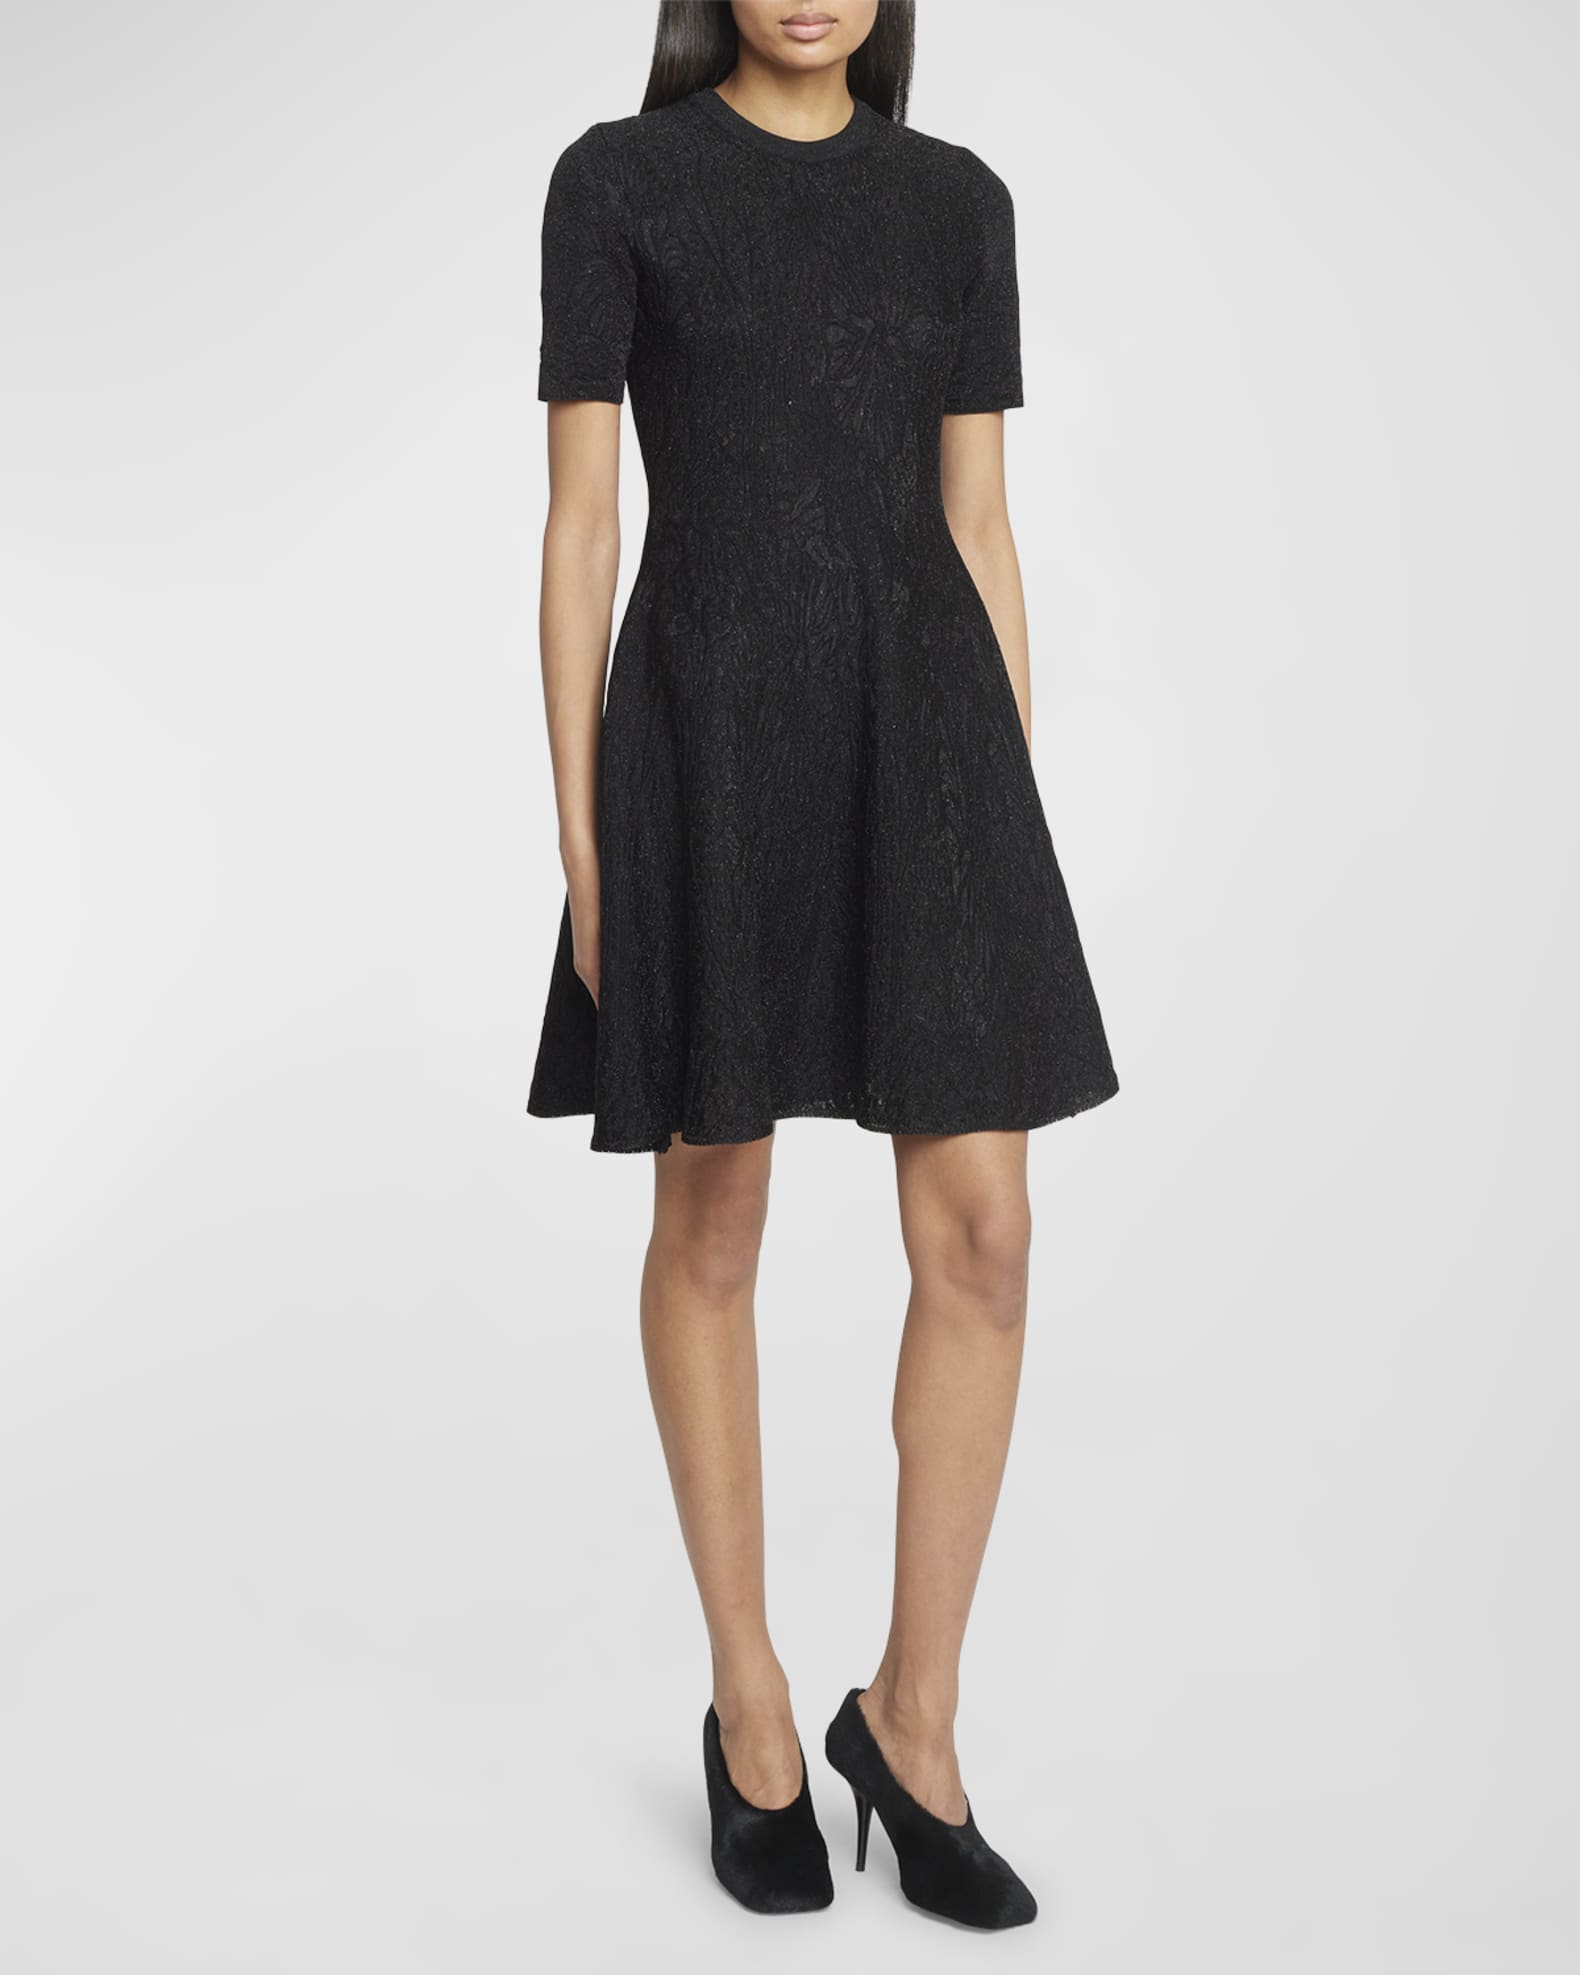 Givenchy Embossed Jacquard Dress Fit-and-Flare Marcus | Neiman